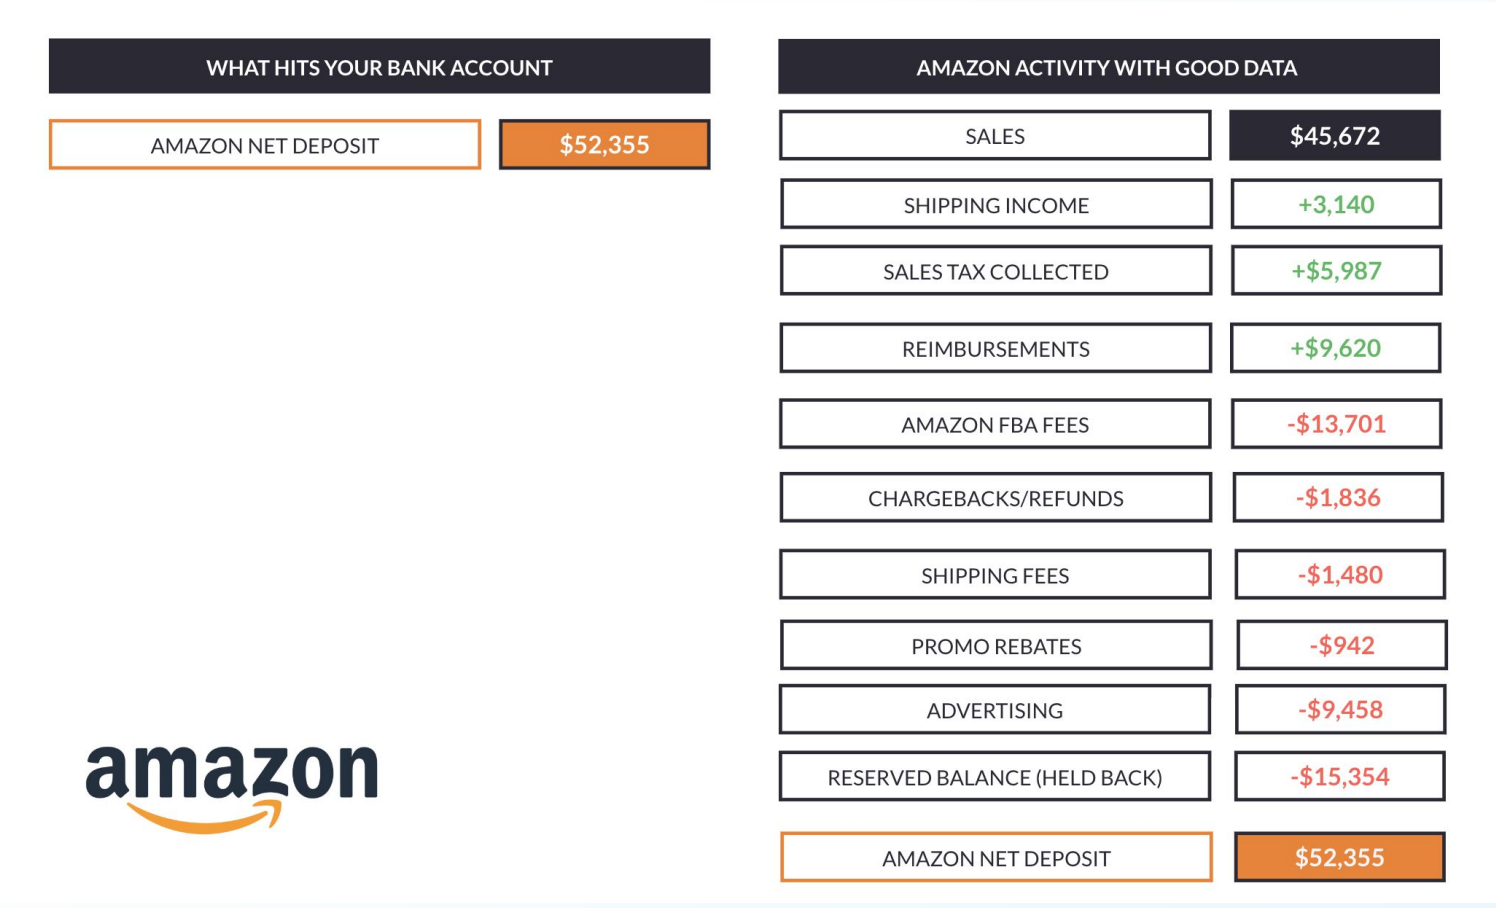 The left side shows what an Amazon settlement looks like, the right side shows that deposit broken down by transaction types